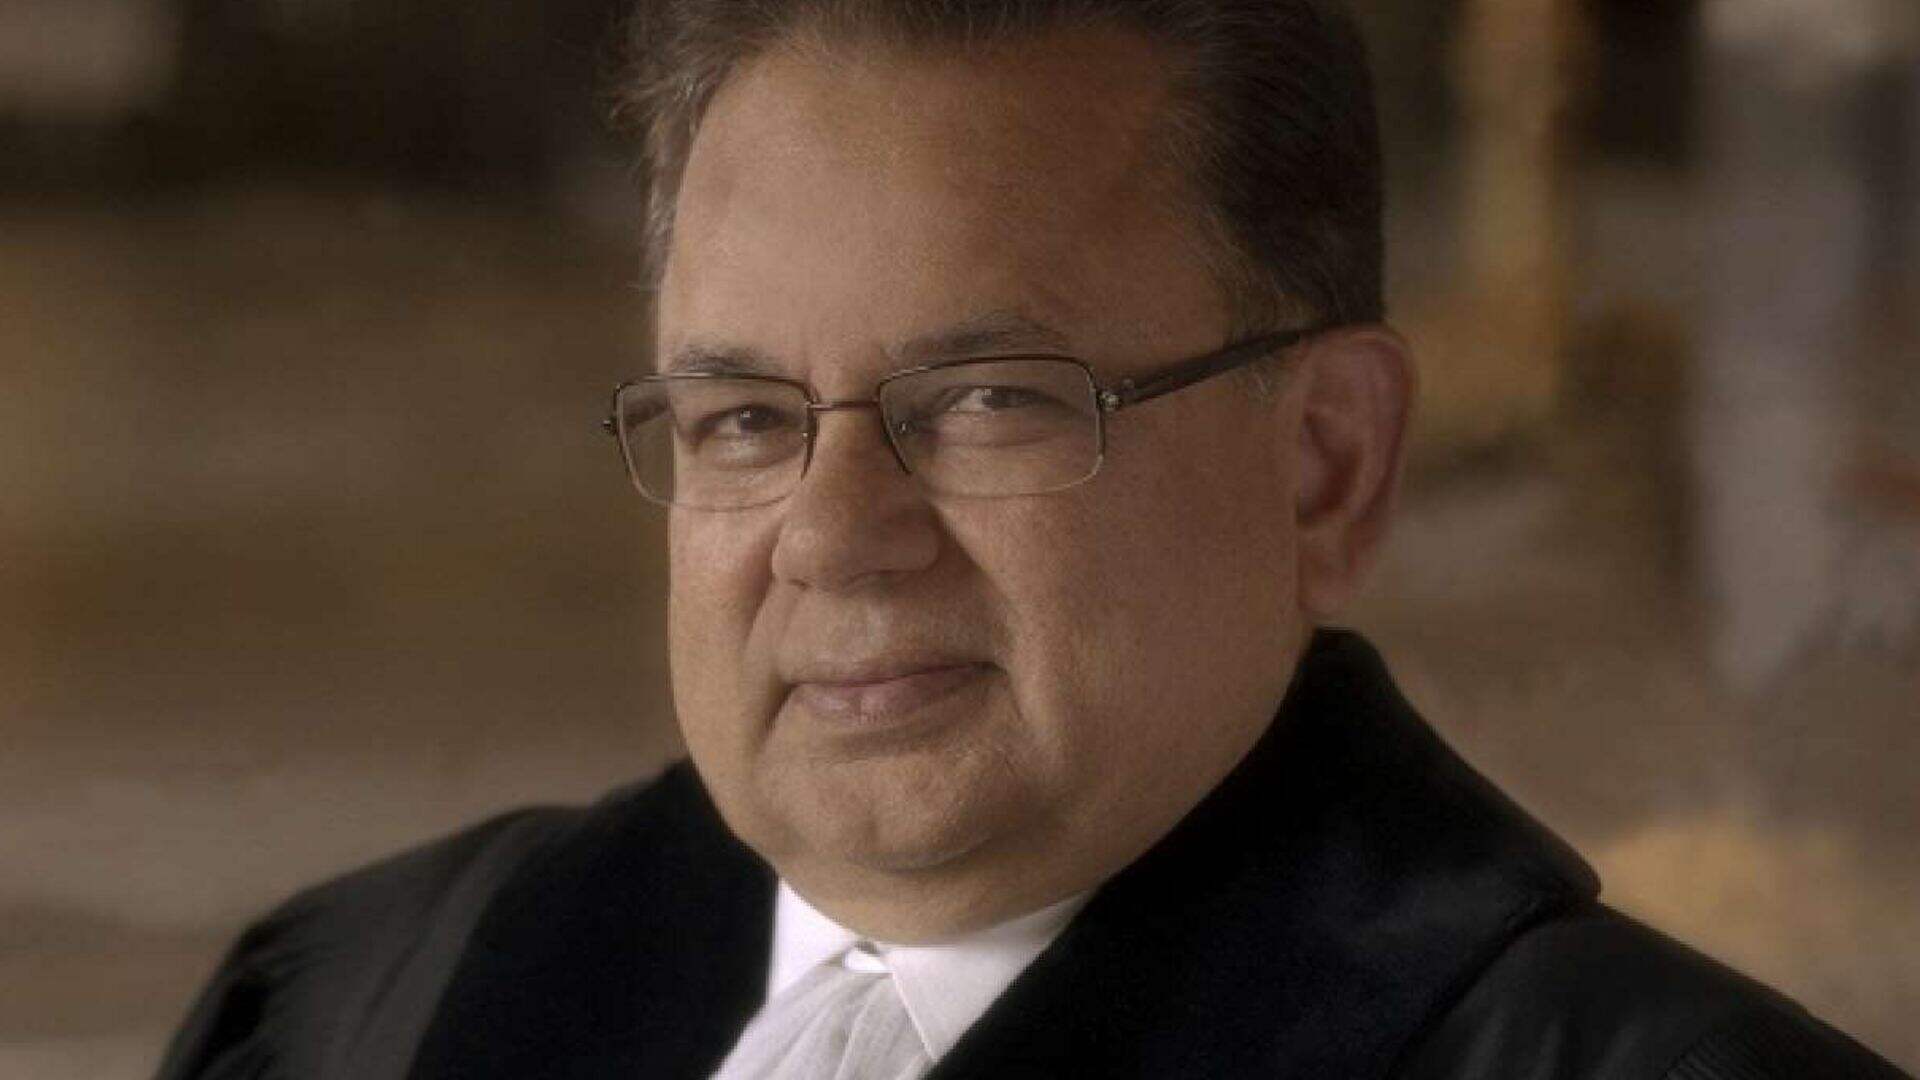 Meet The Indian Judge Who Voted On ICJ’s Order Against Israel